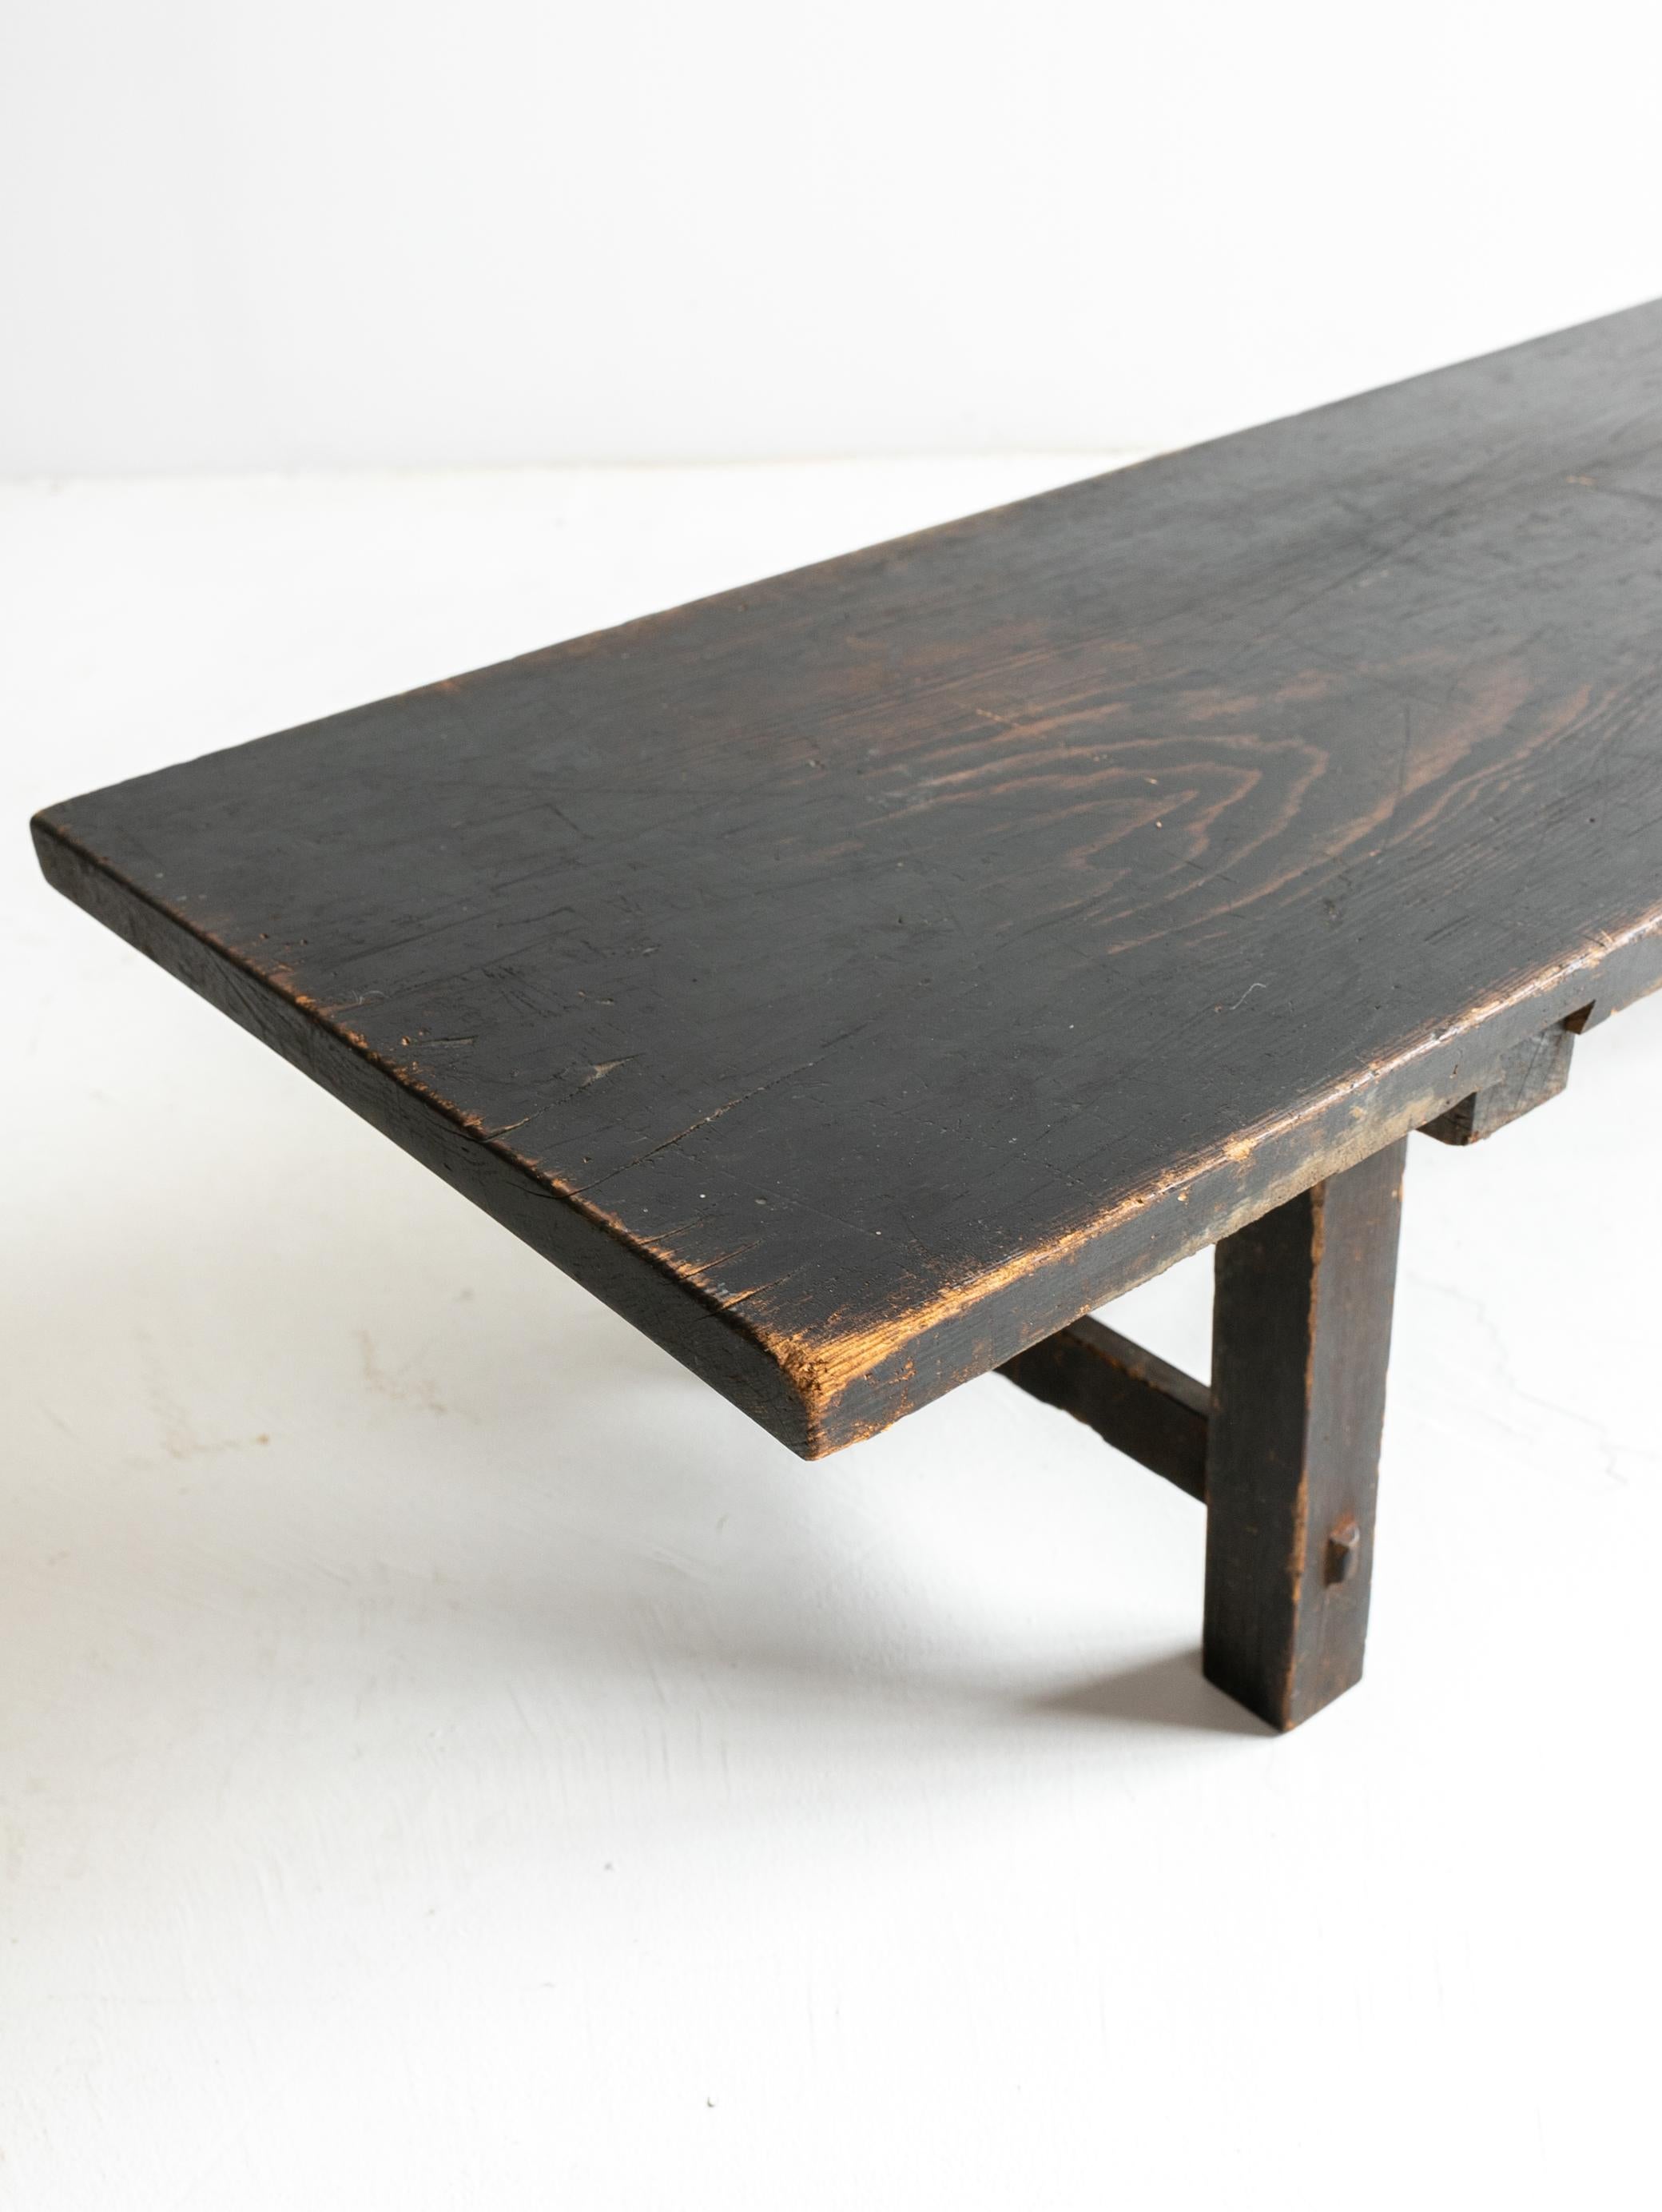 Japanese old wooden low table/ wabisabi coffee table/1850-1920 For Sale 3